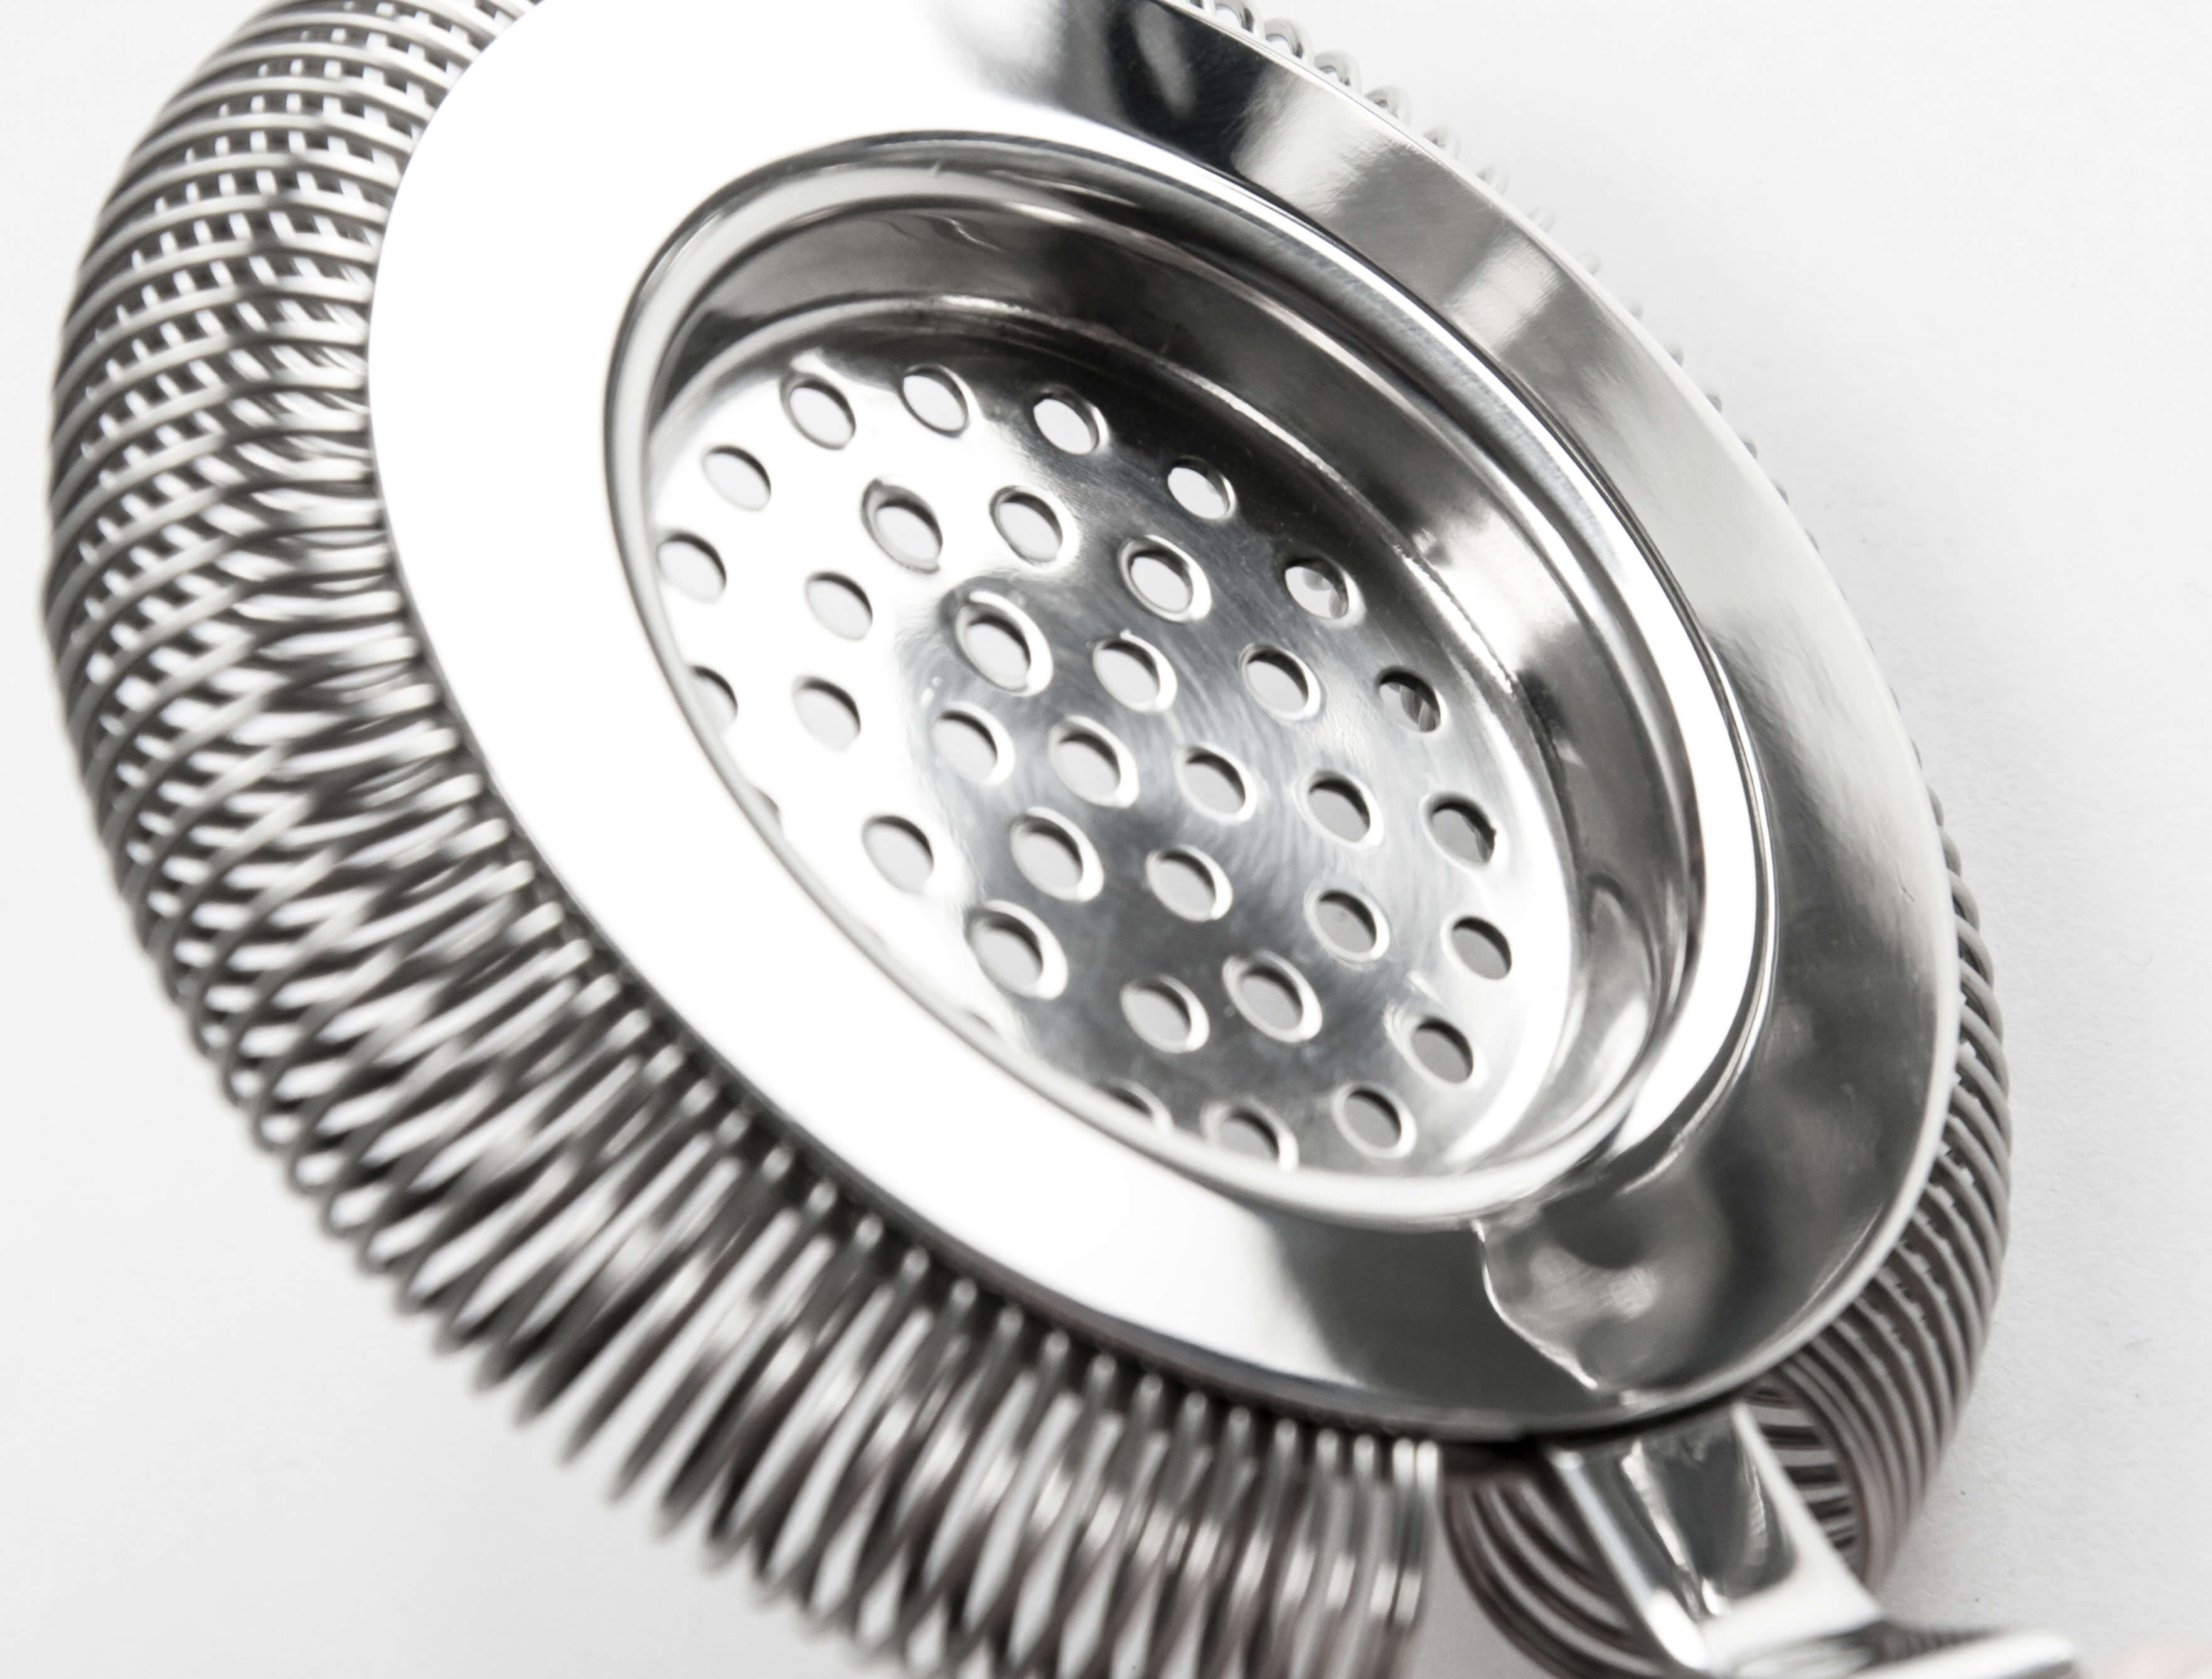 Hawthorn Strainer Calabrese - stainless steel